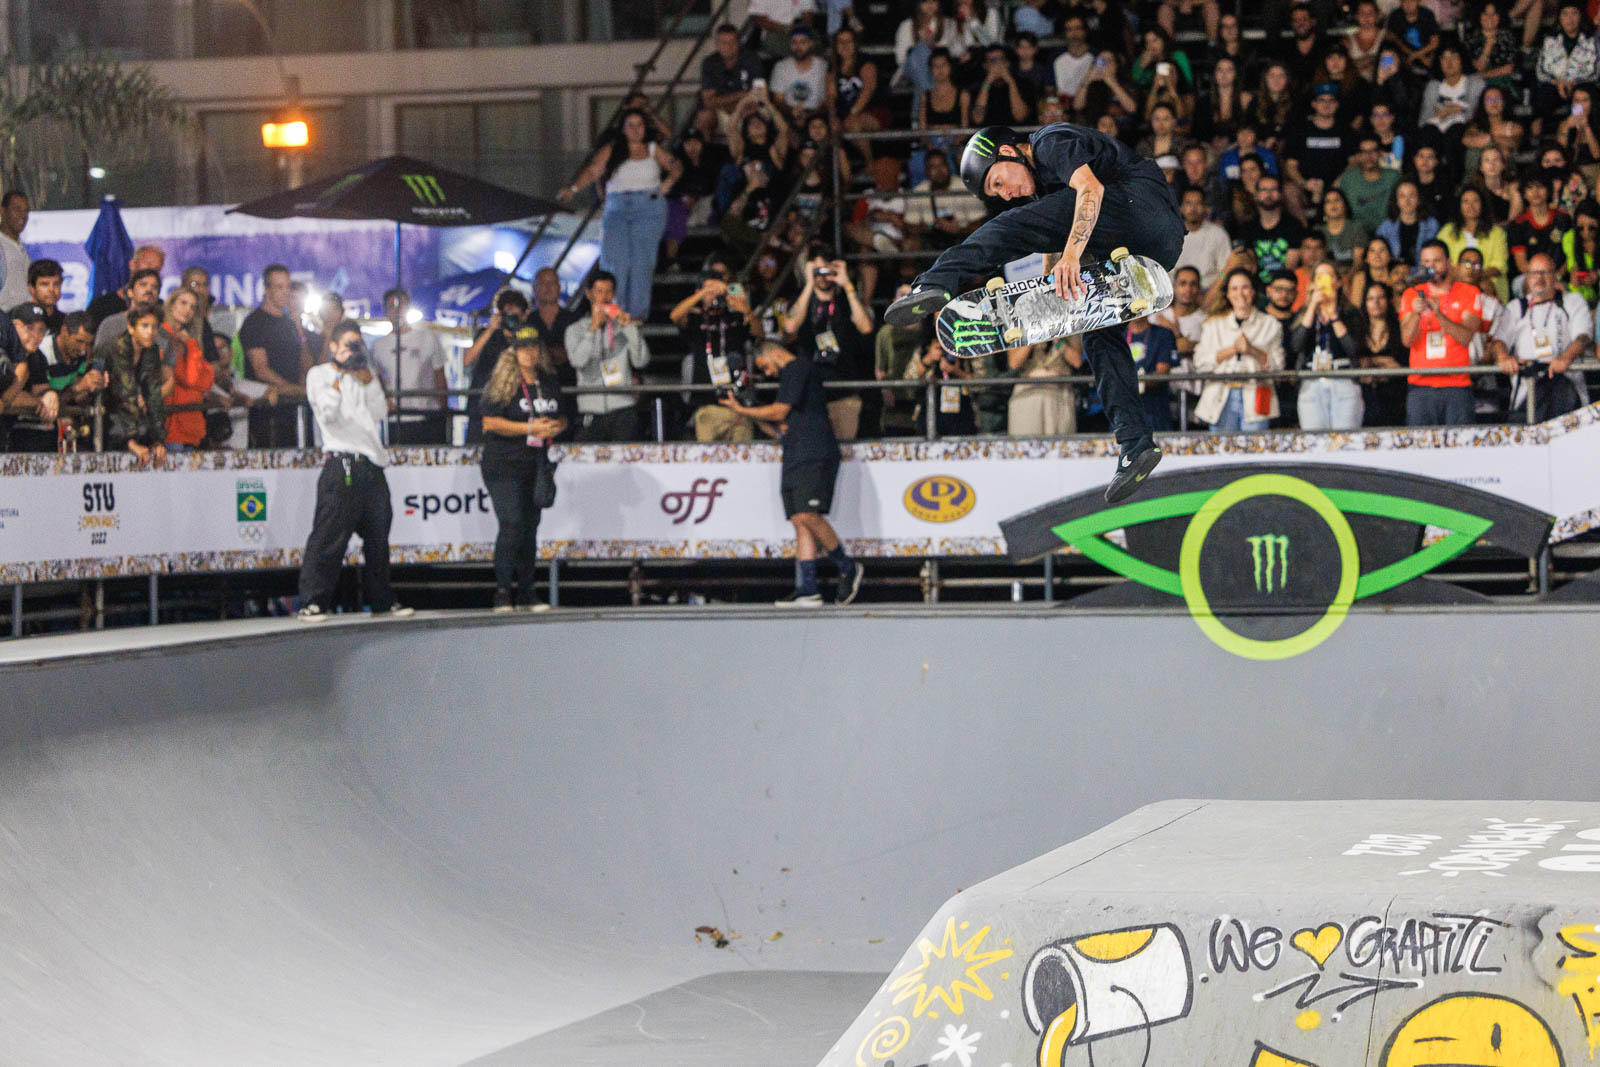 Monster Energy's Luiz Francisco from São Paulo, Brazil, Rises to Third Place Finish in Men’s Skateboard Park Event